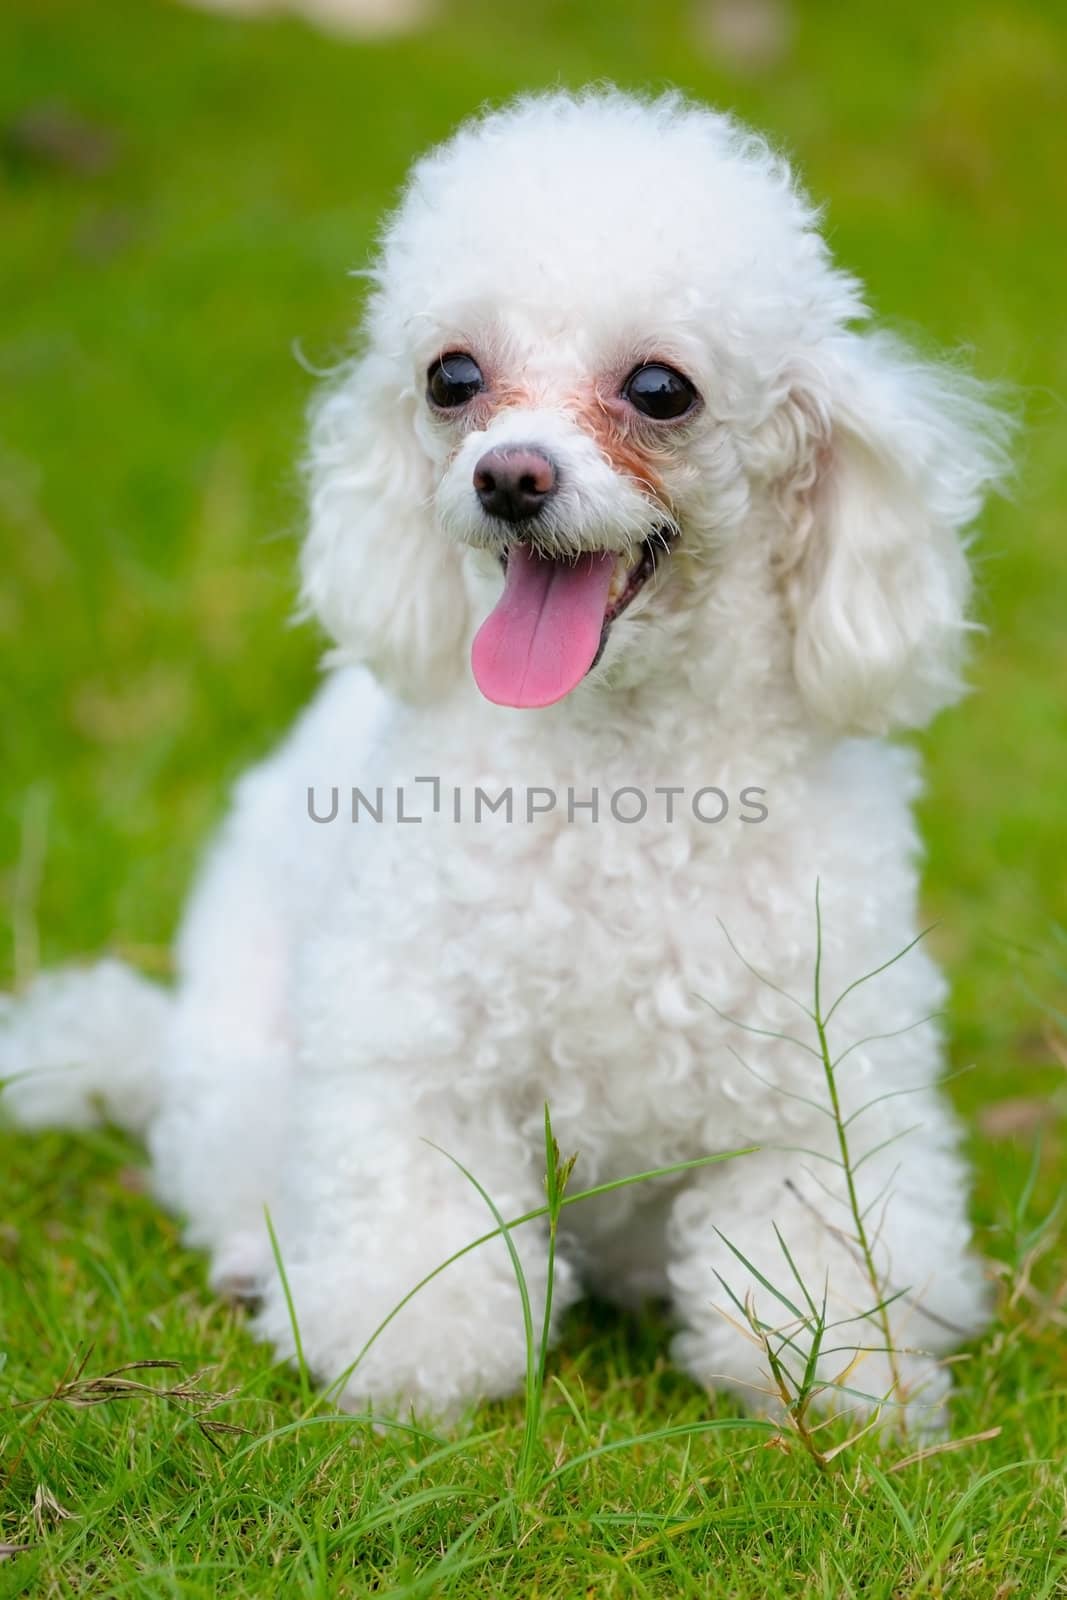 A little toy poodle dog standing on the lawn